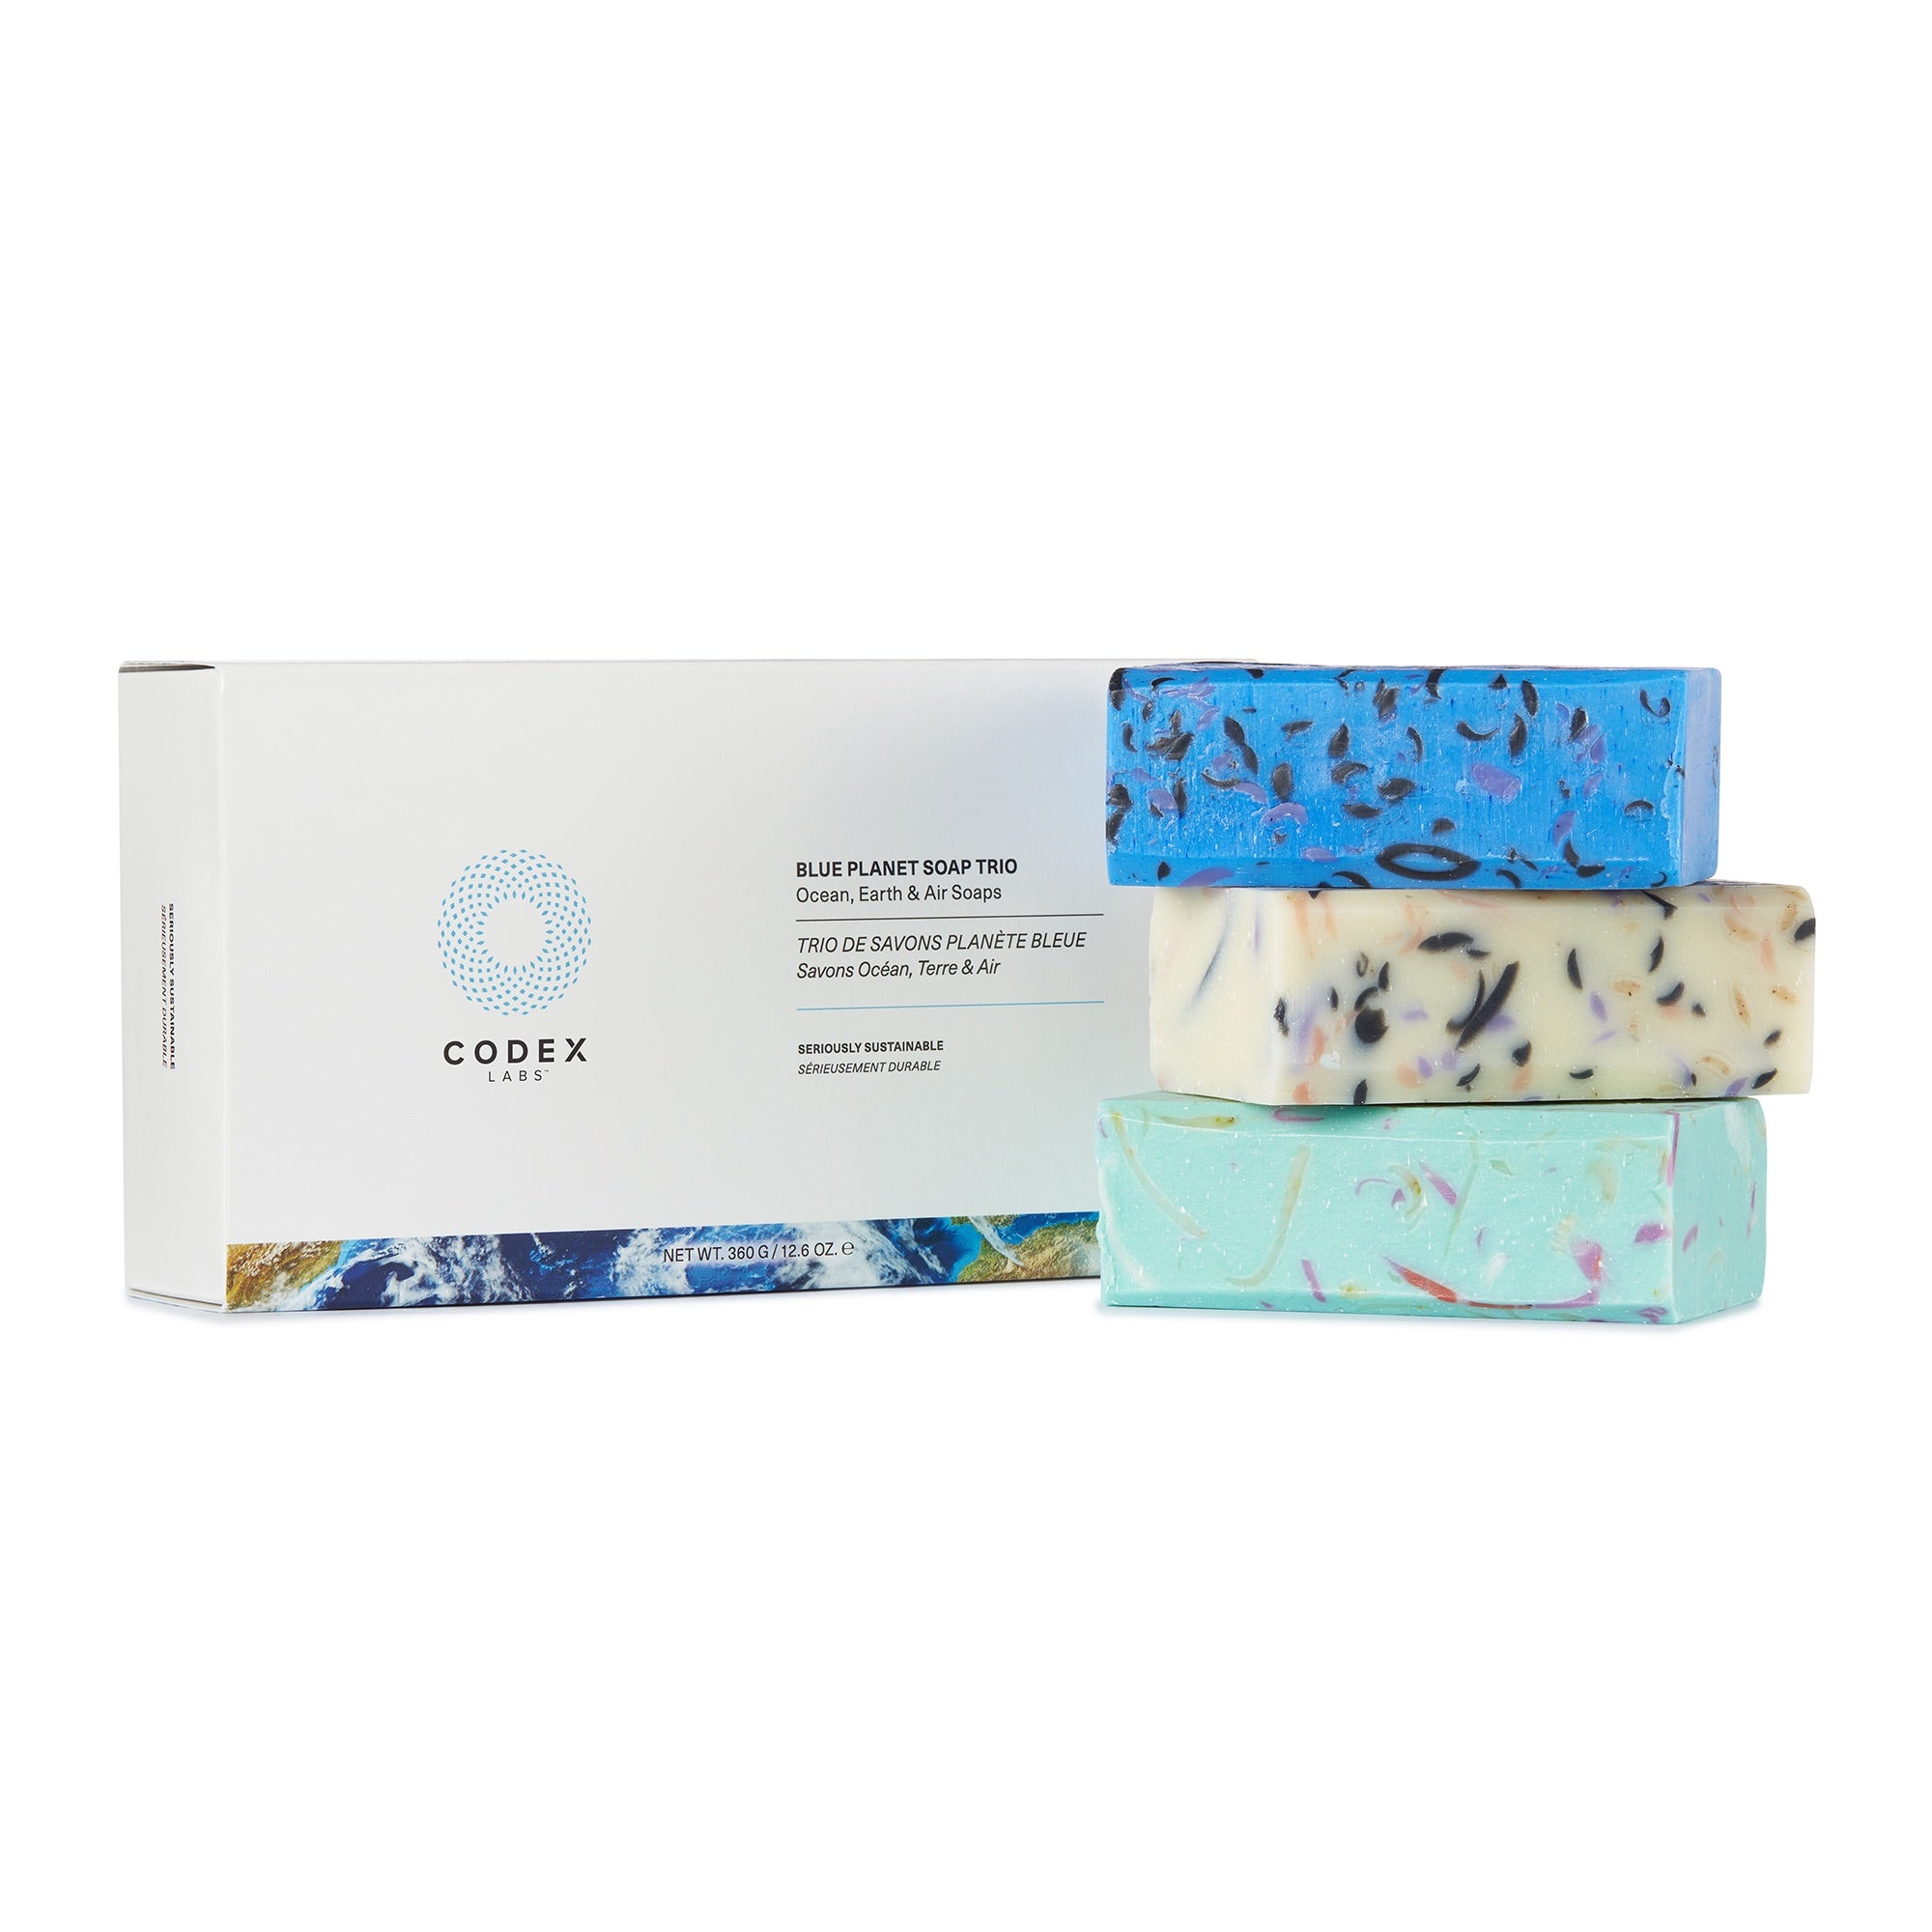 Blue Planet Soap Trio box with three bars of soap stacked on top of one another next to its packaging..